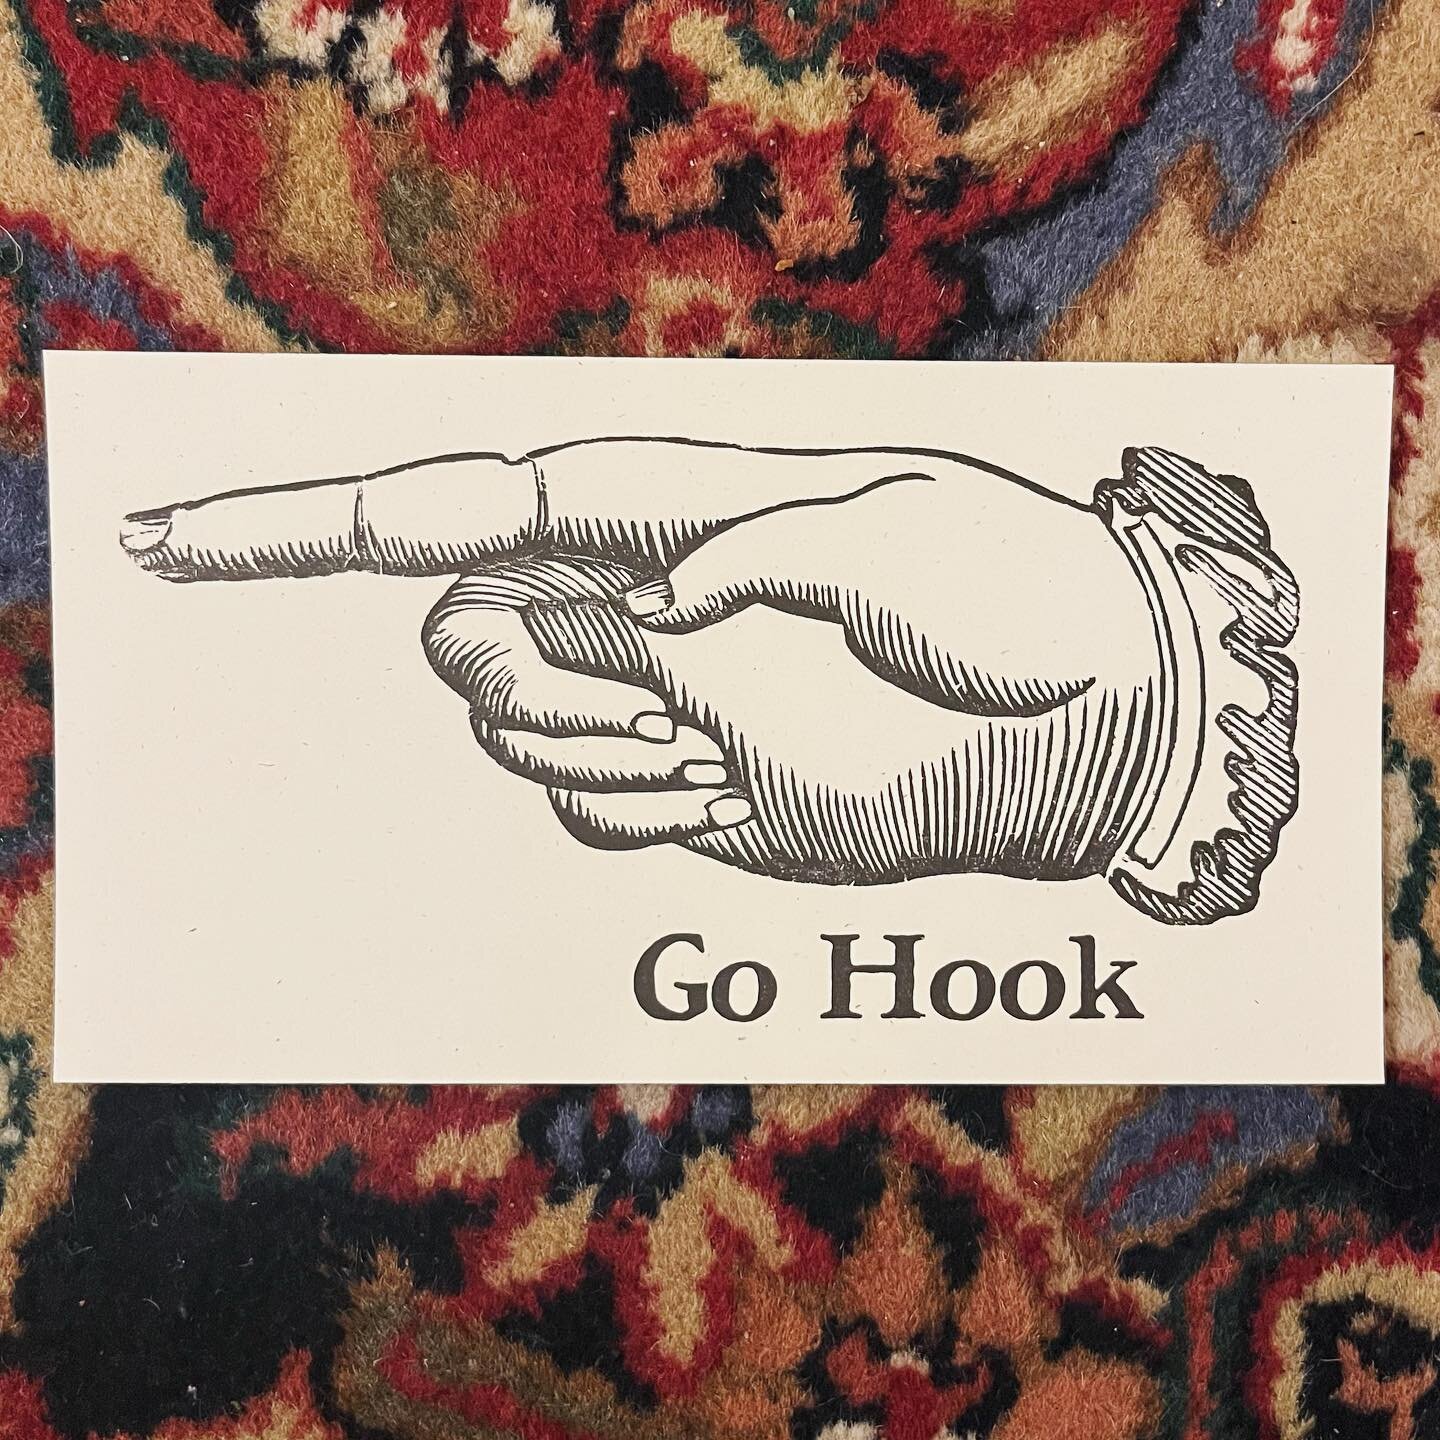 I love this little sign I got from the @shelburnemuseum. Excited to hang it up by my punch needle materials 🧶